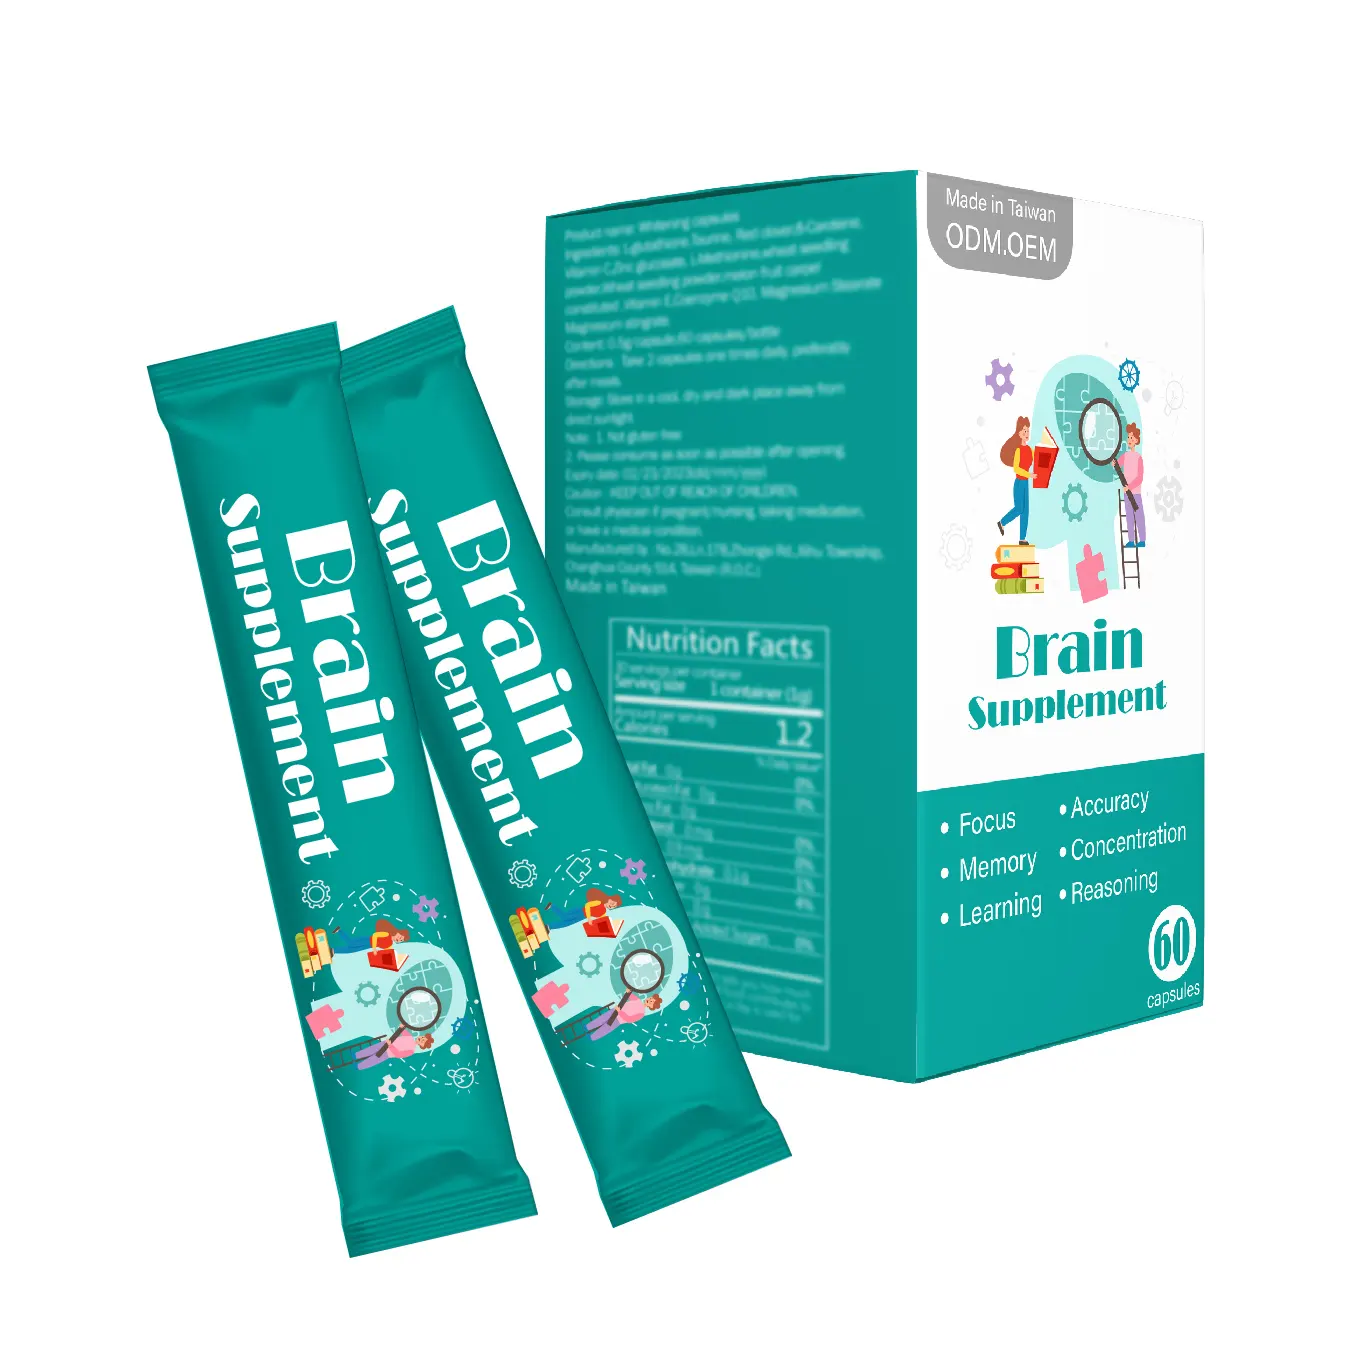 oem supplement Focus Memory Concentration Learning and Accuracy health products